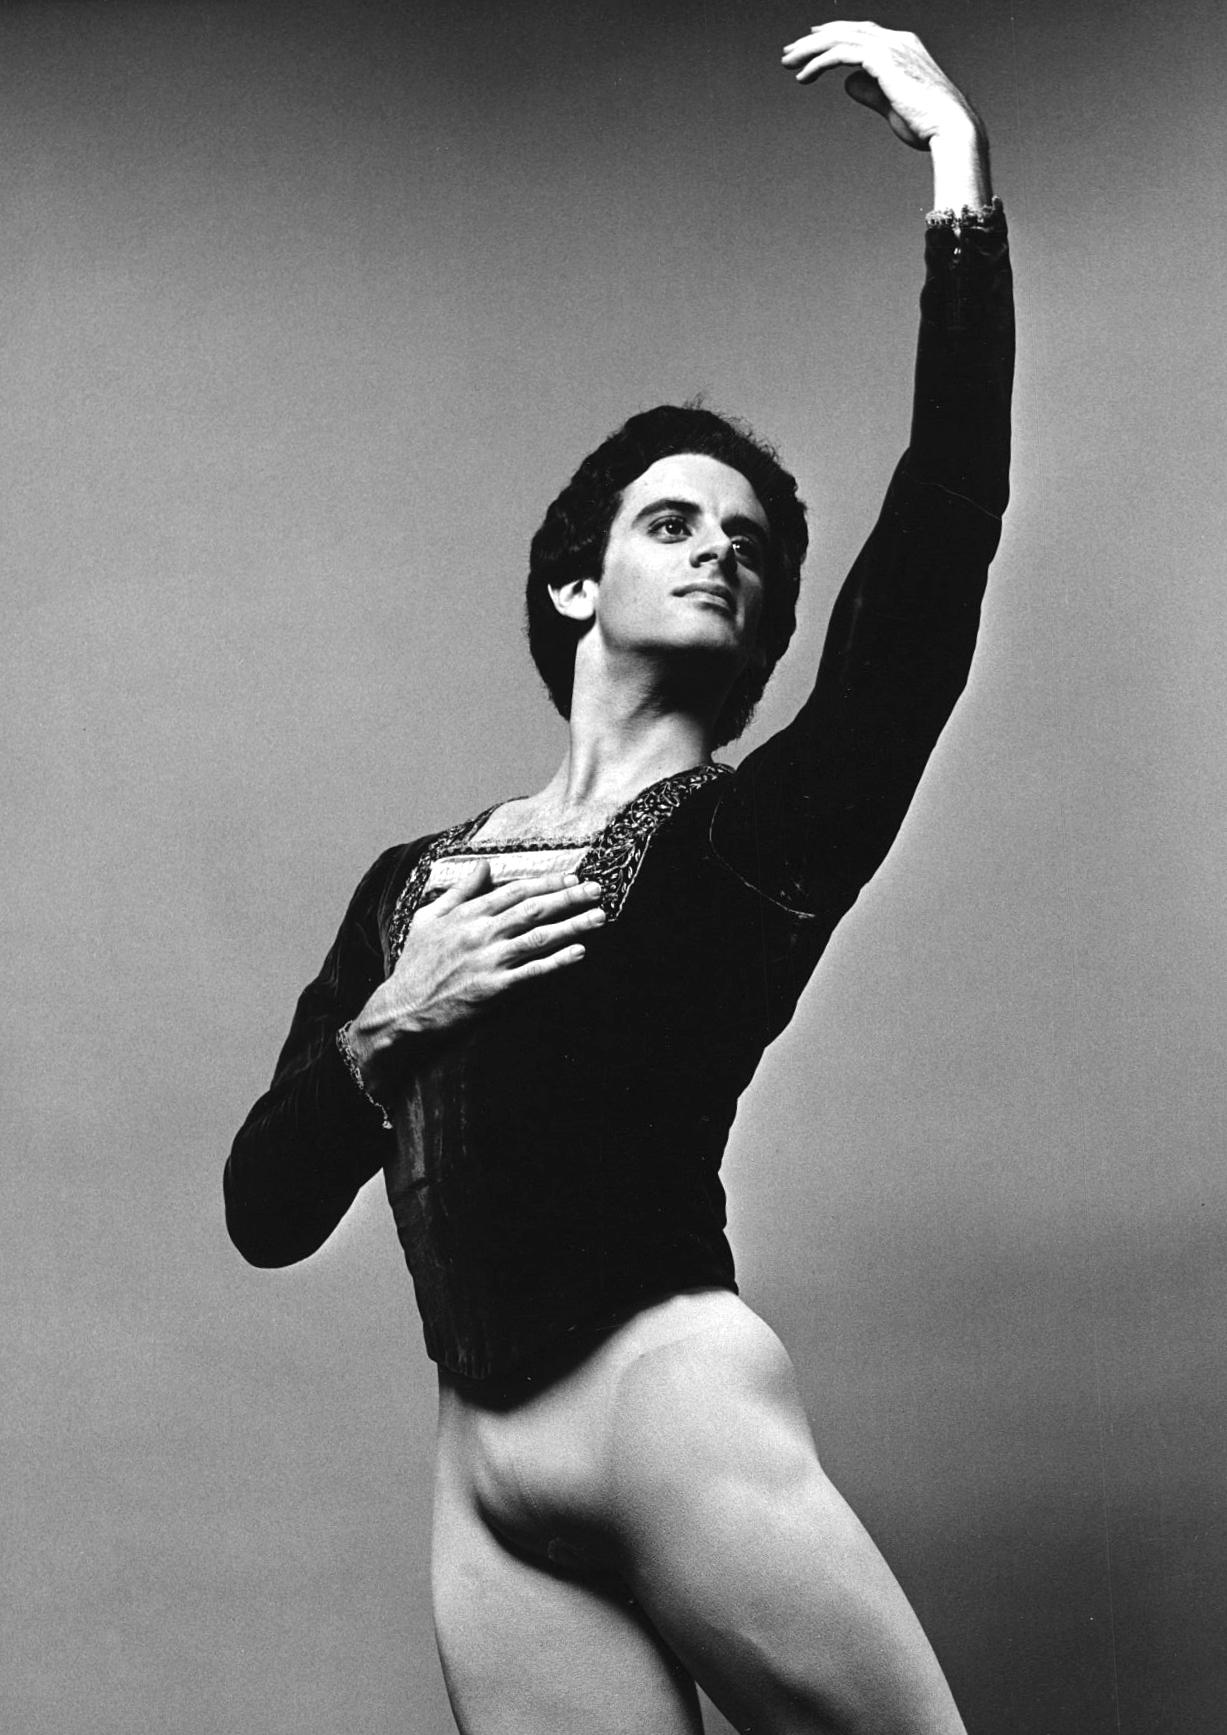 Dancer Fernando Bujones, photographed for Dance Magazine, signed by Mitchell - Photograph by Jack Mitchell